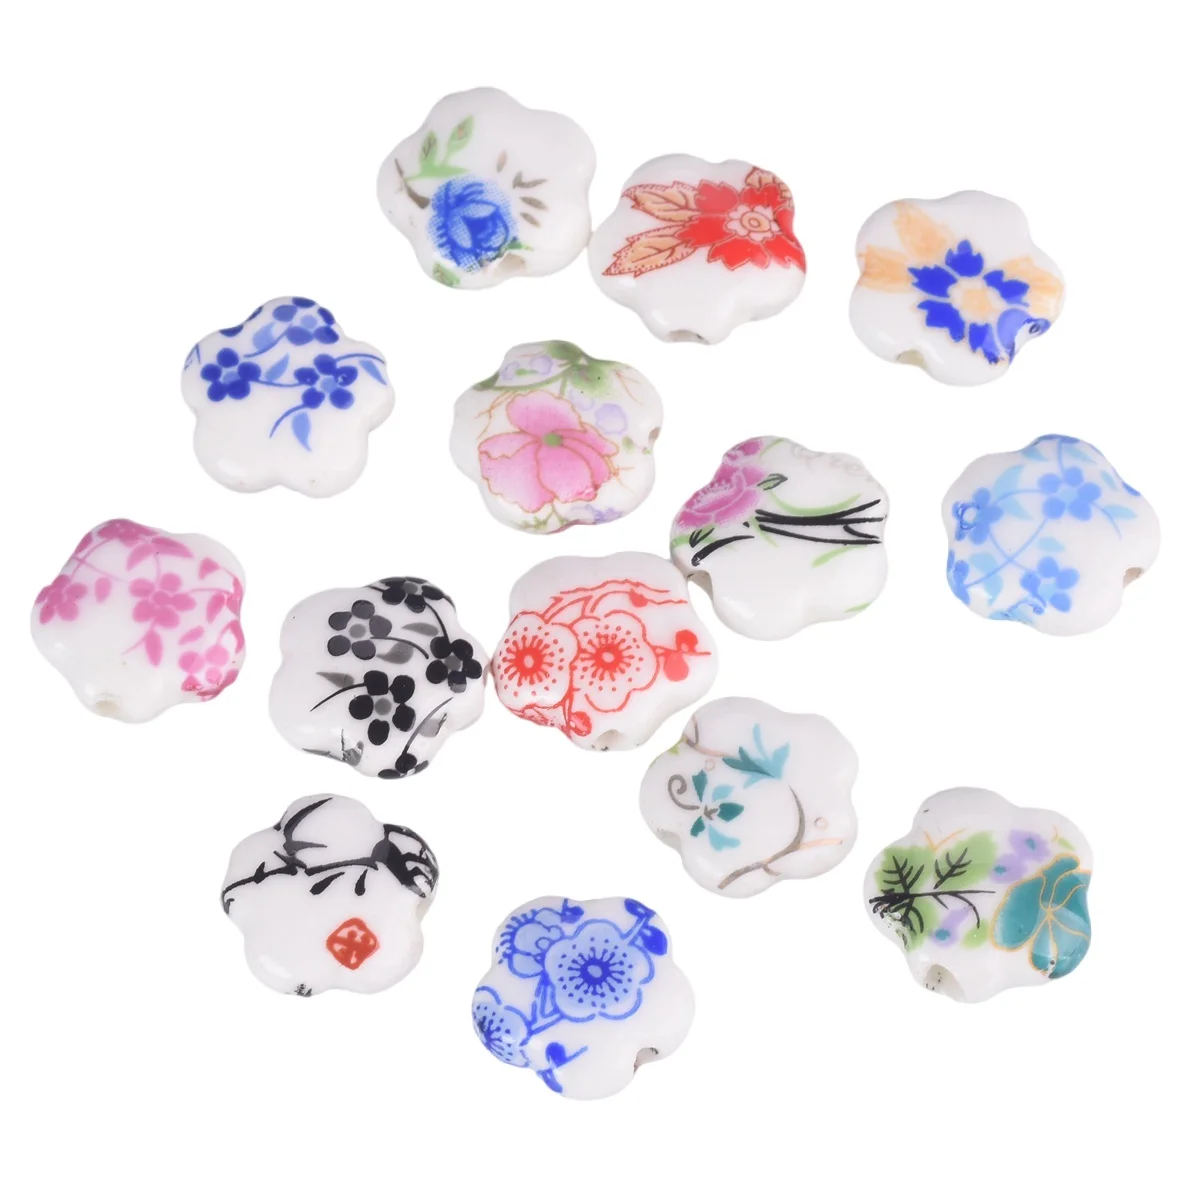 10pcs 15mm Flower Shape Patterns Ceramic Porcelain Loose Crafts Beads Lot For Jewelry Making DIY Findings 10pcs flat round 15mm handmade ceramic porcelain loose spacer beads lot for jewelry making diy crafts findings